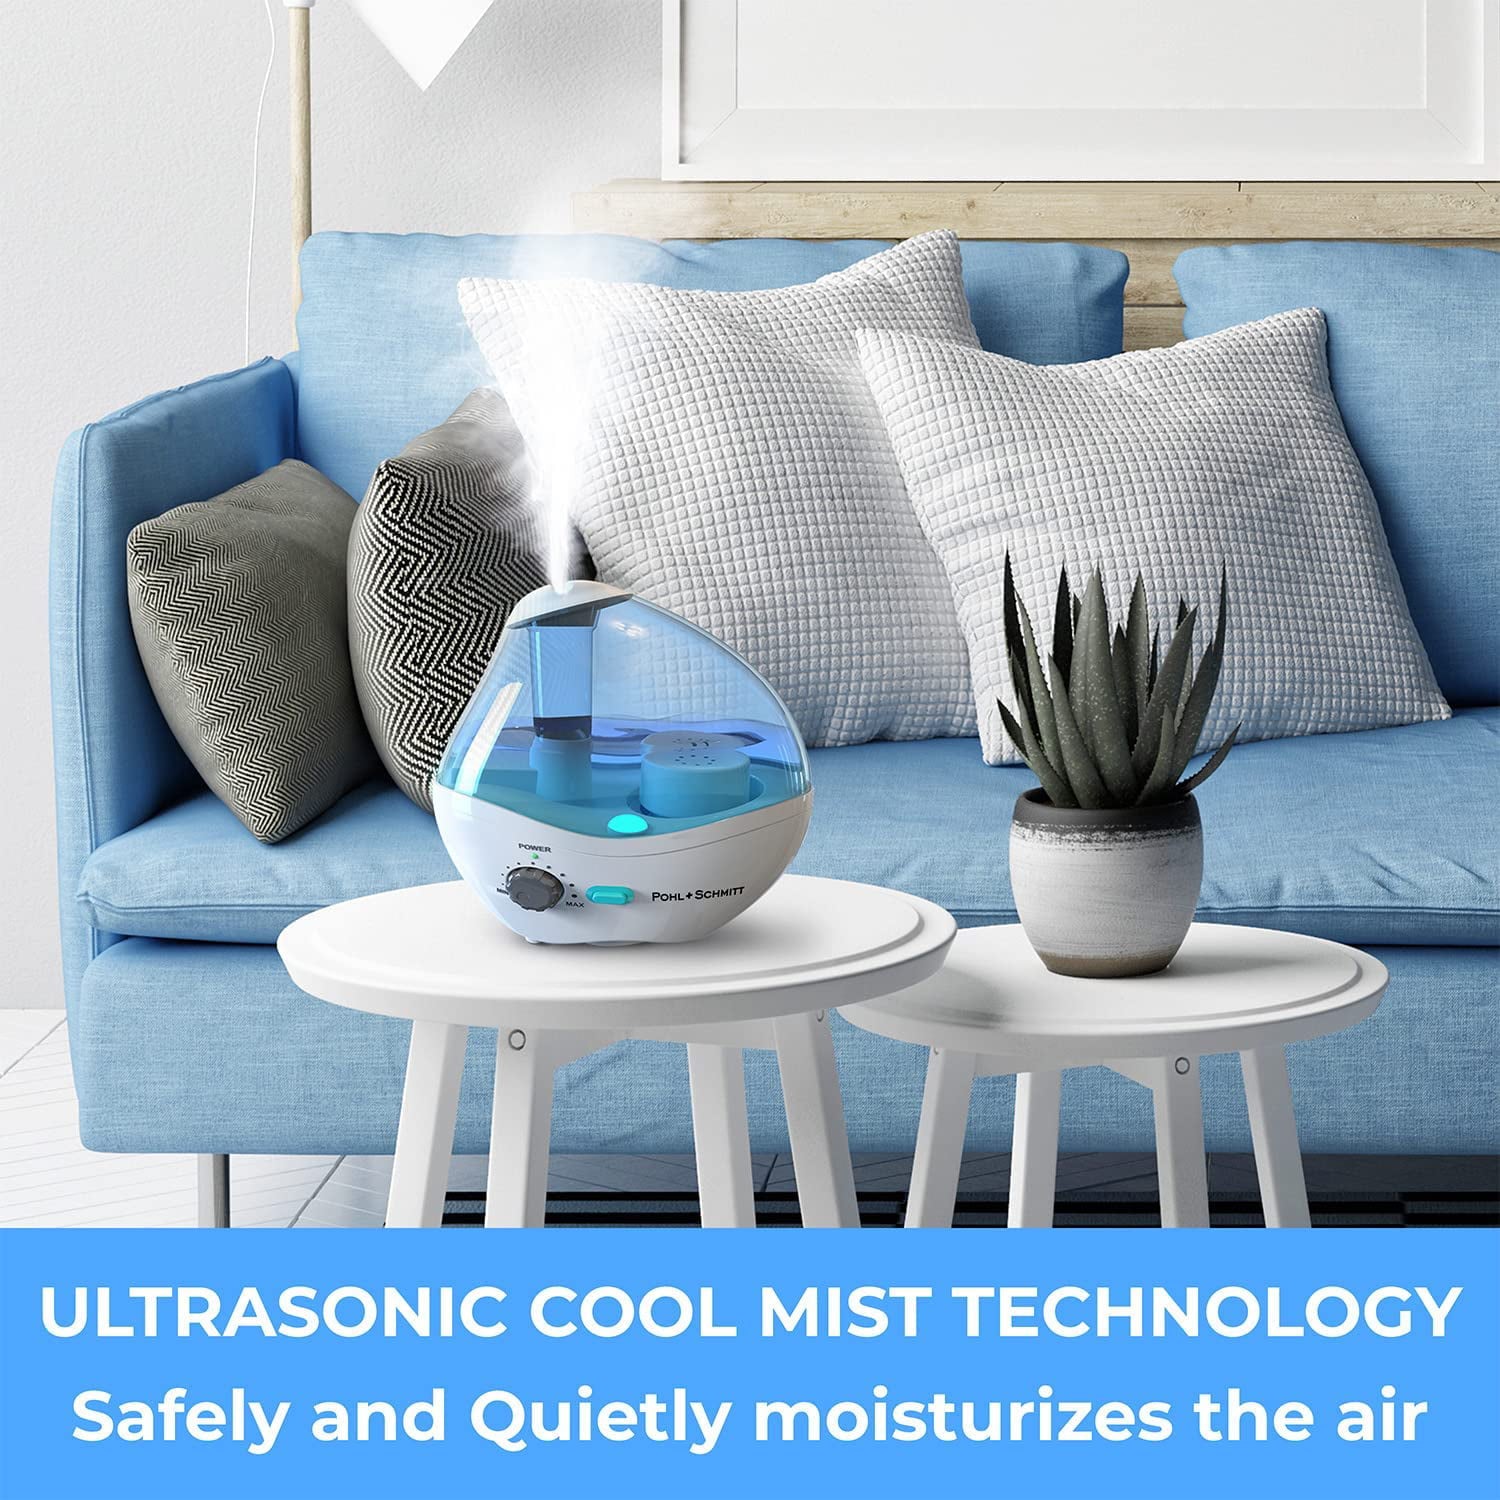 Pohl Schmitt Ultrasonic Humidifier, Whisper-Quiet Operation with Nightlight and Auto-Shut Off, Adjustable Mist, 16 hours Operating Time & Filter Included, 6 Pack